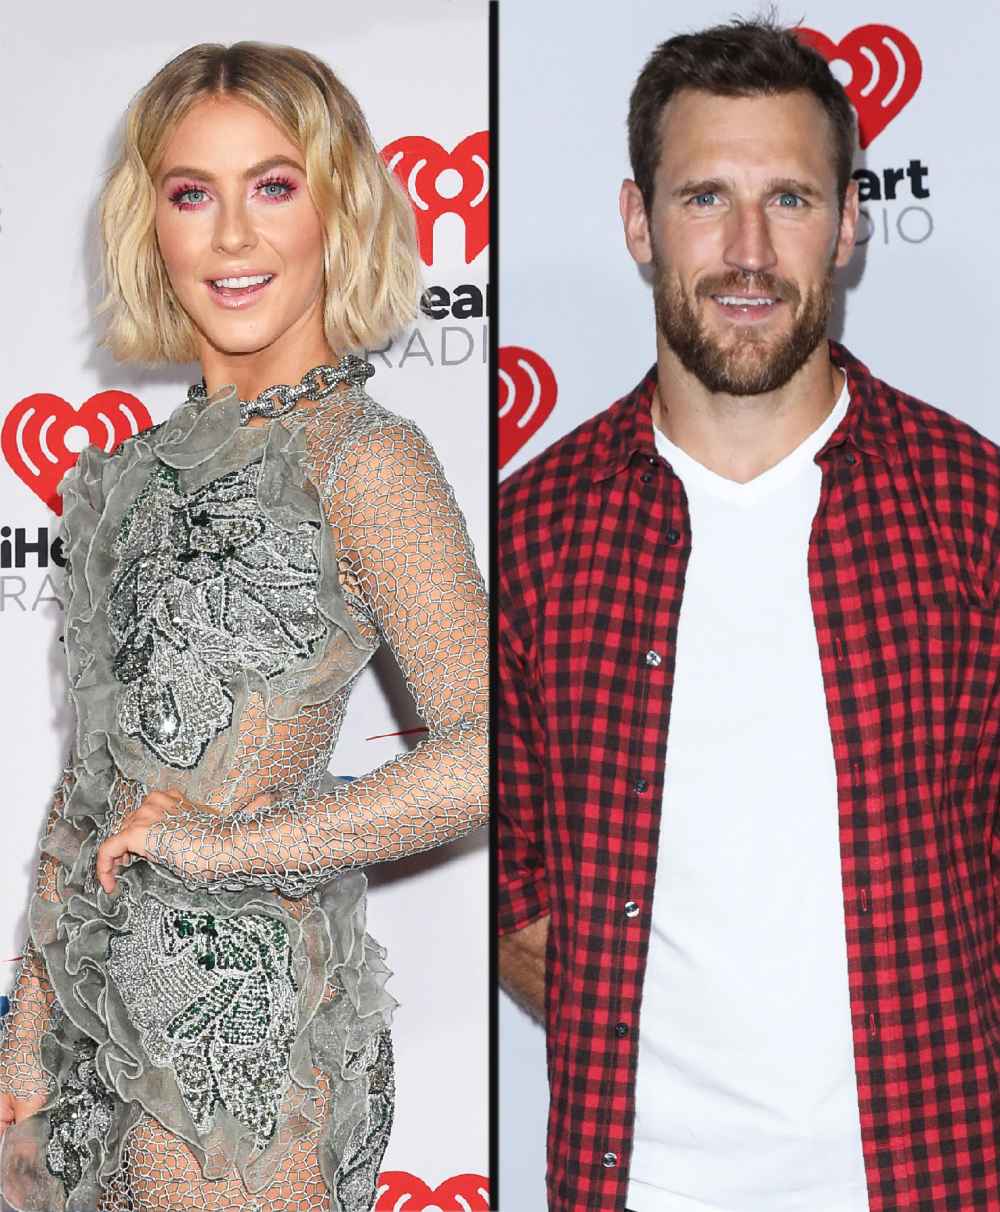 Julianne Hough and Brooks Laich 'Save Face' Amid Marriage Troubles